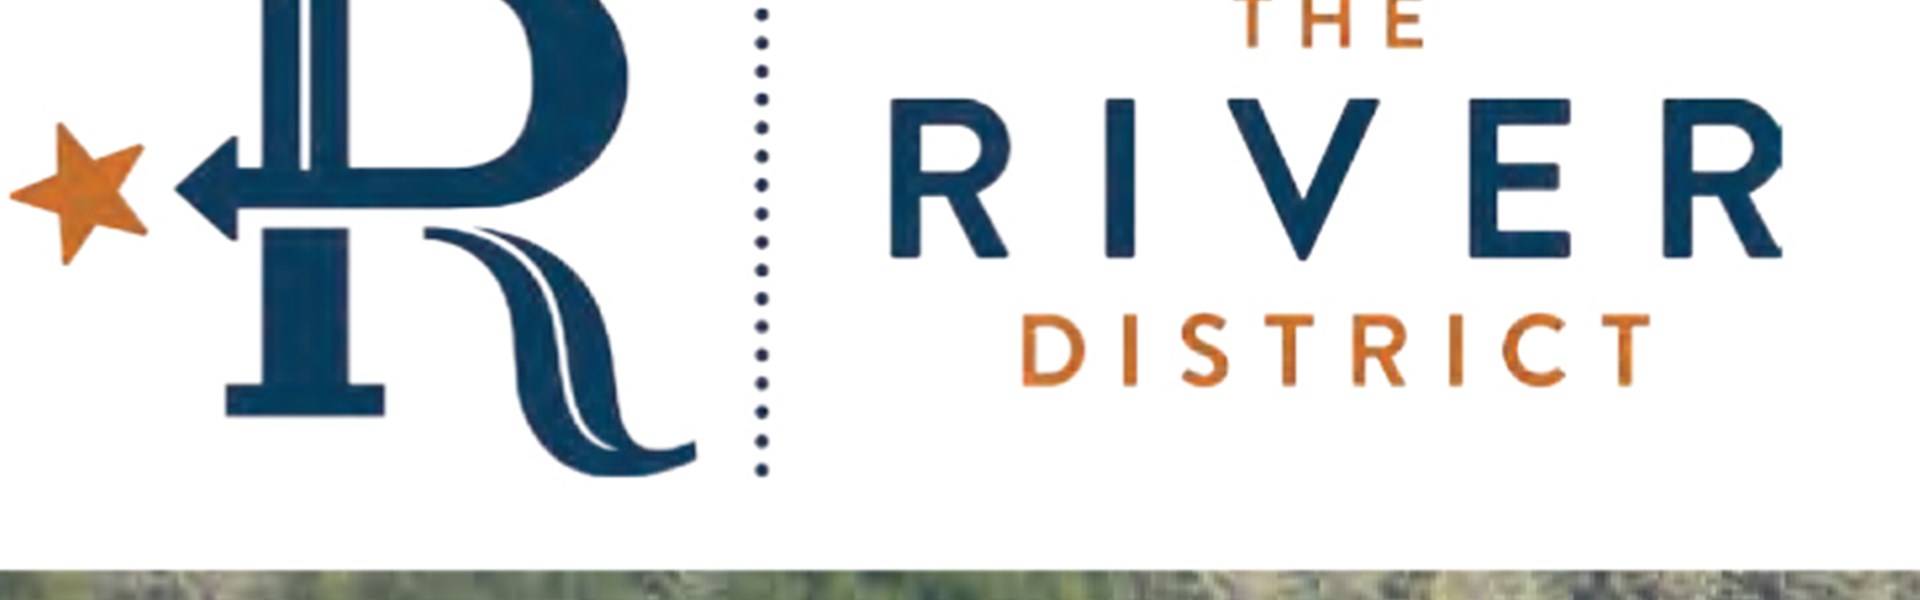 The River District: Infographic on The Latest Economic Impact Report